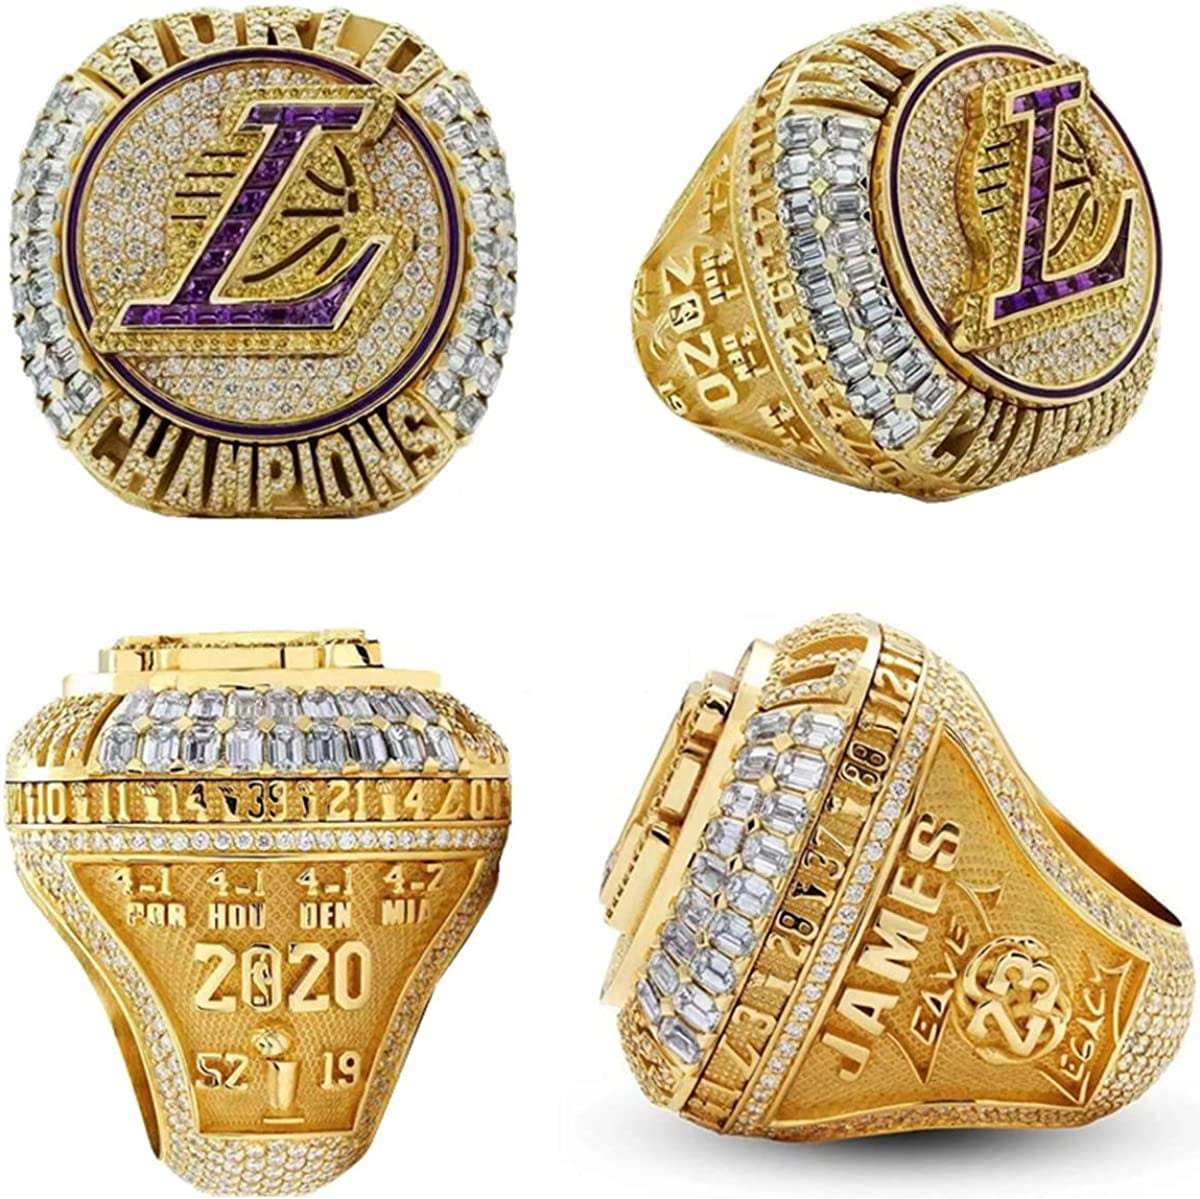 2020 Lakers Championship Ring 2020 Official Version Detachable Ring Replica Lebron LA Champions Ring with Championship Ring Wooden Box for Collection Fans Gift 